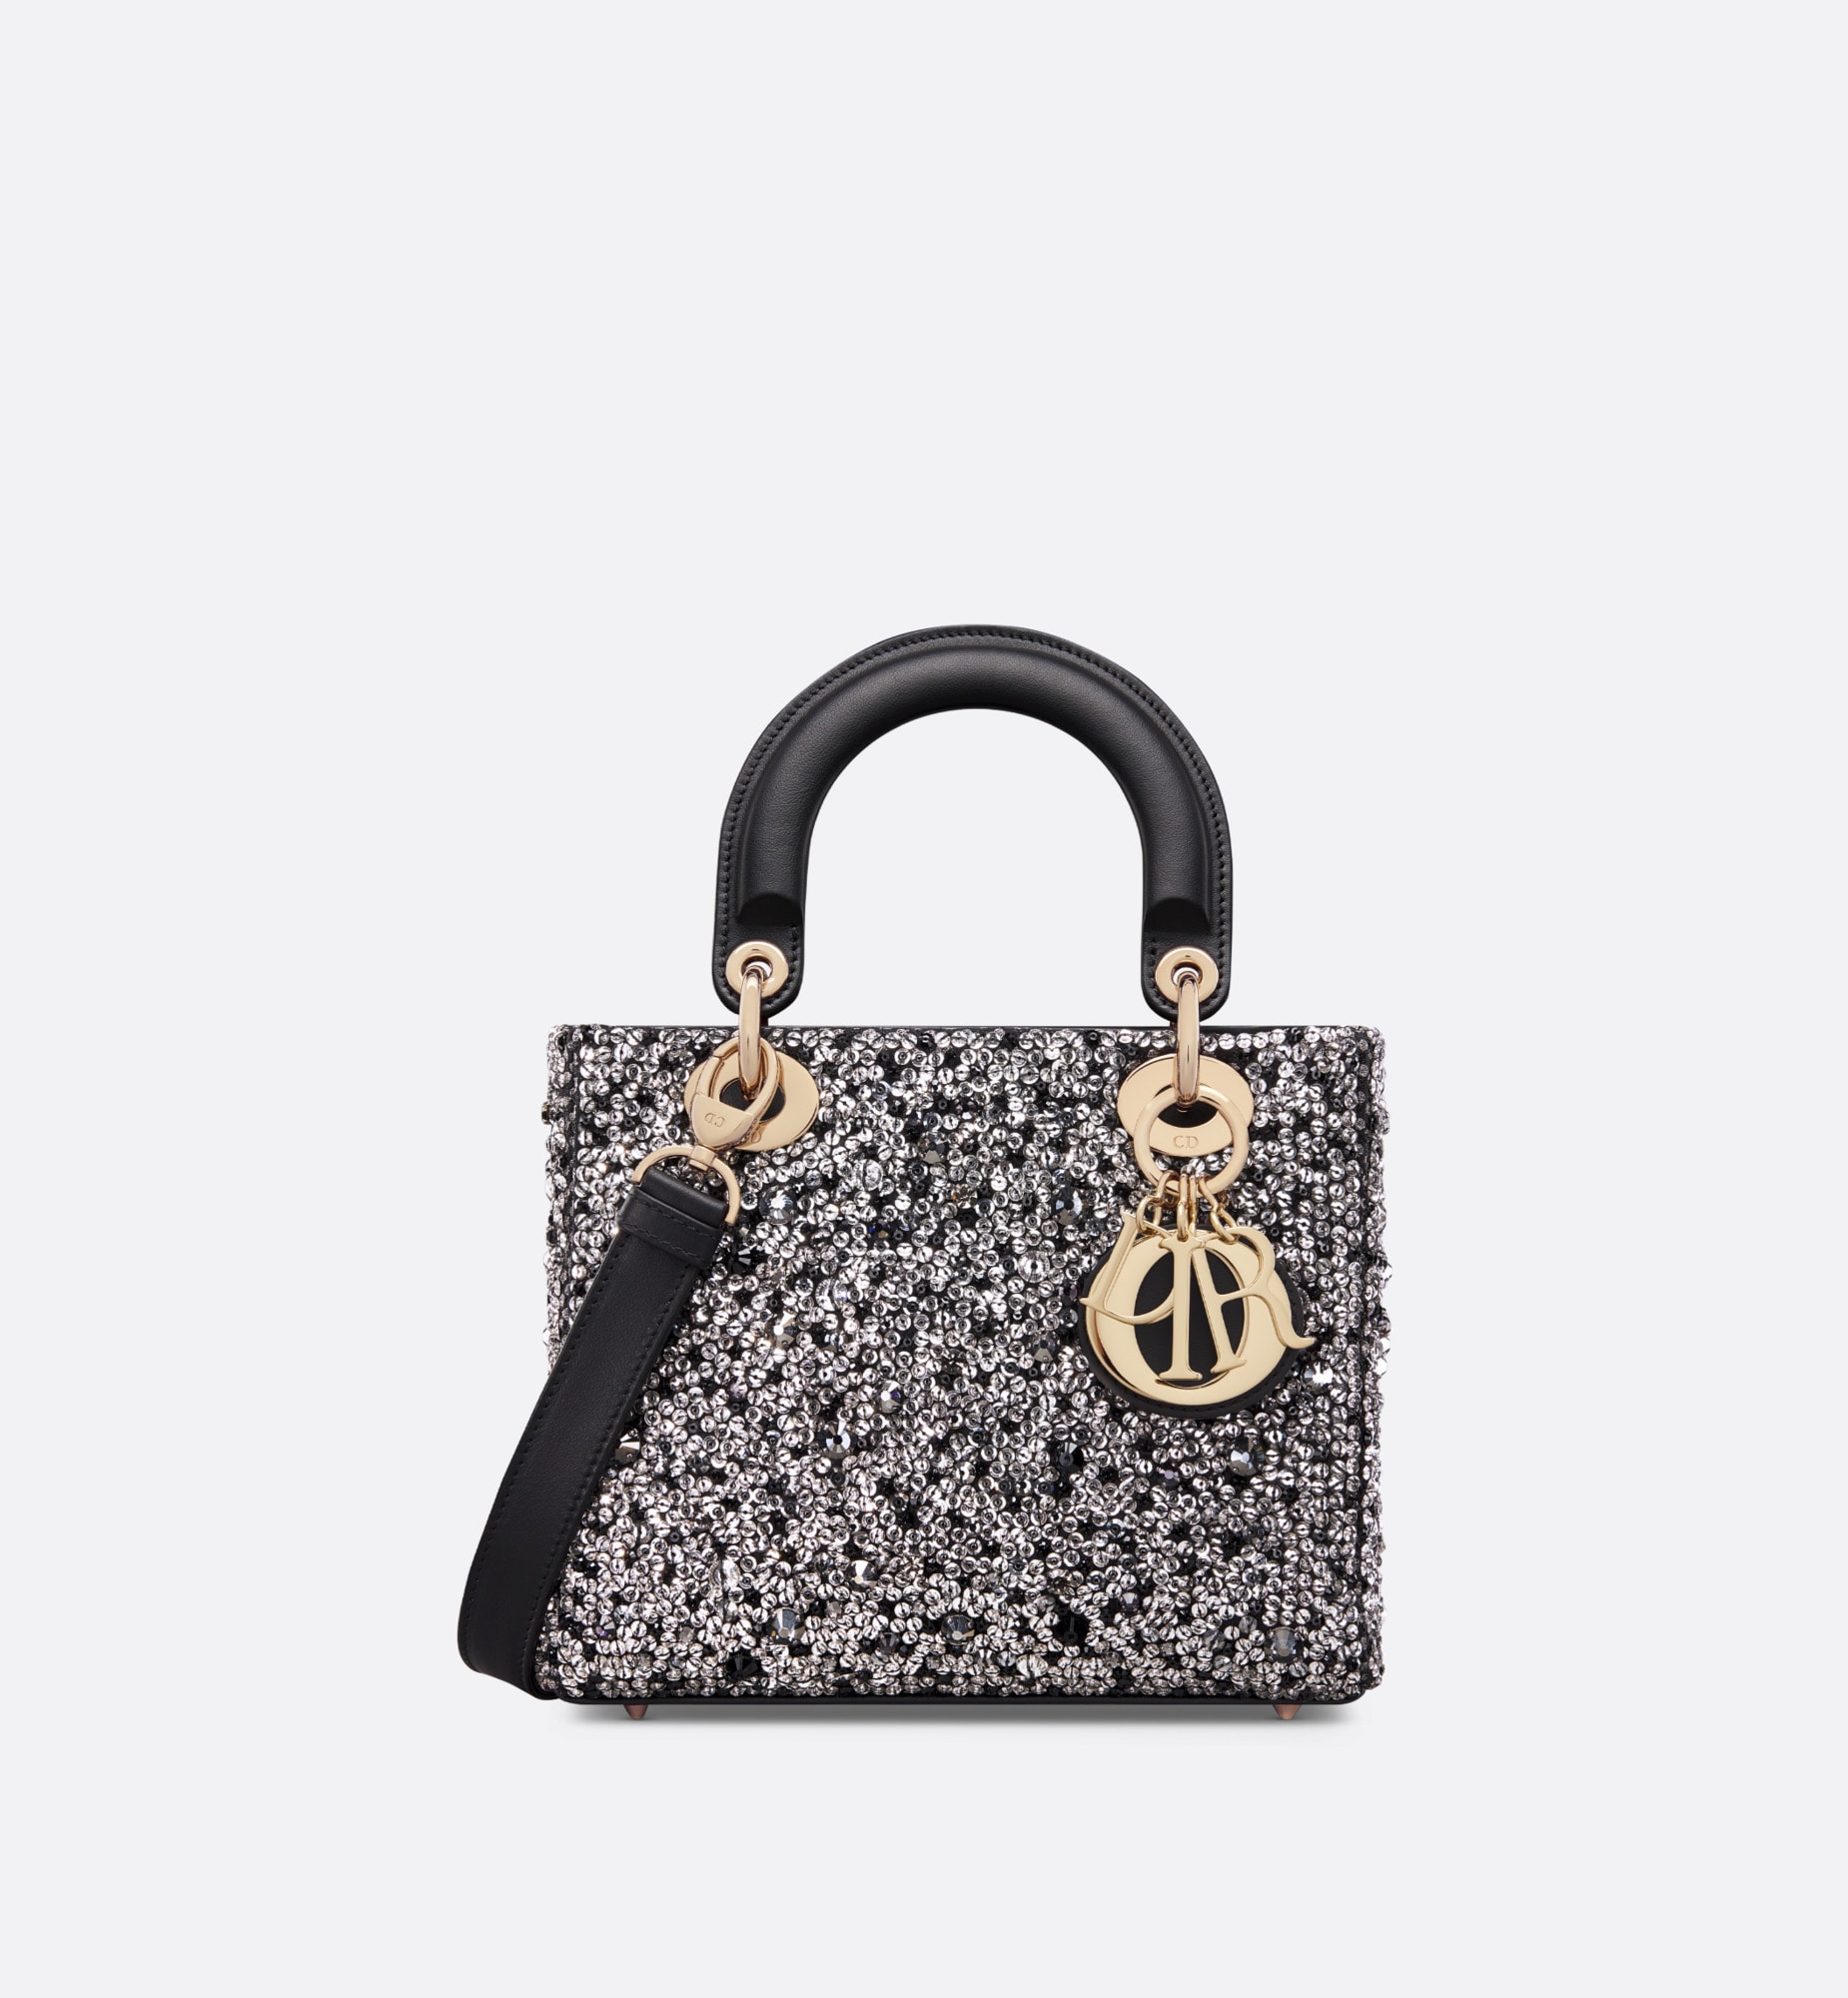 Small lady dior bag black satin embroidered with silver-tone strass